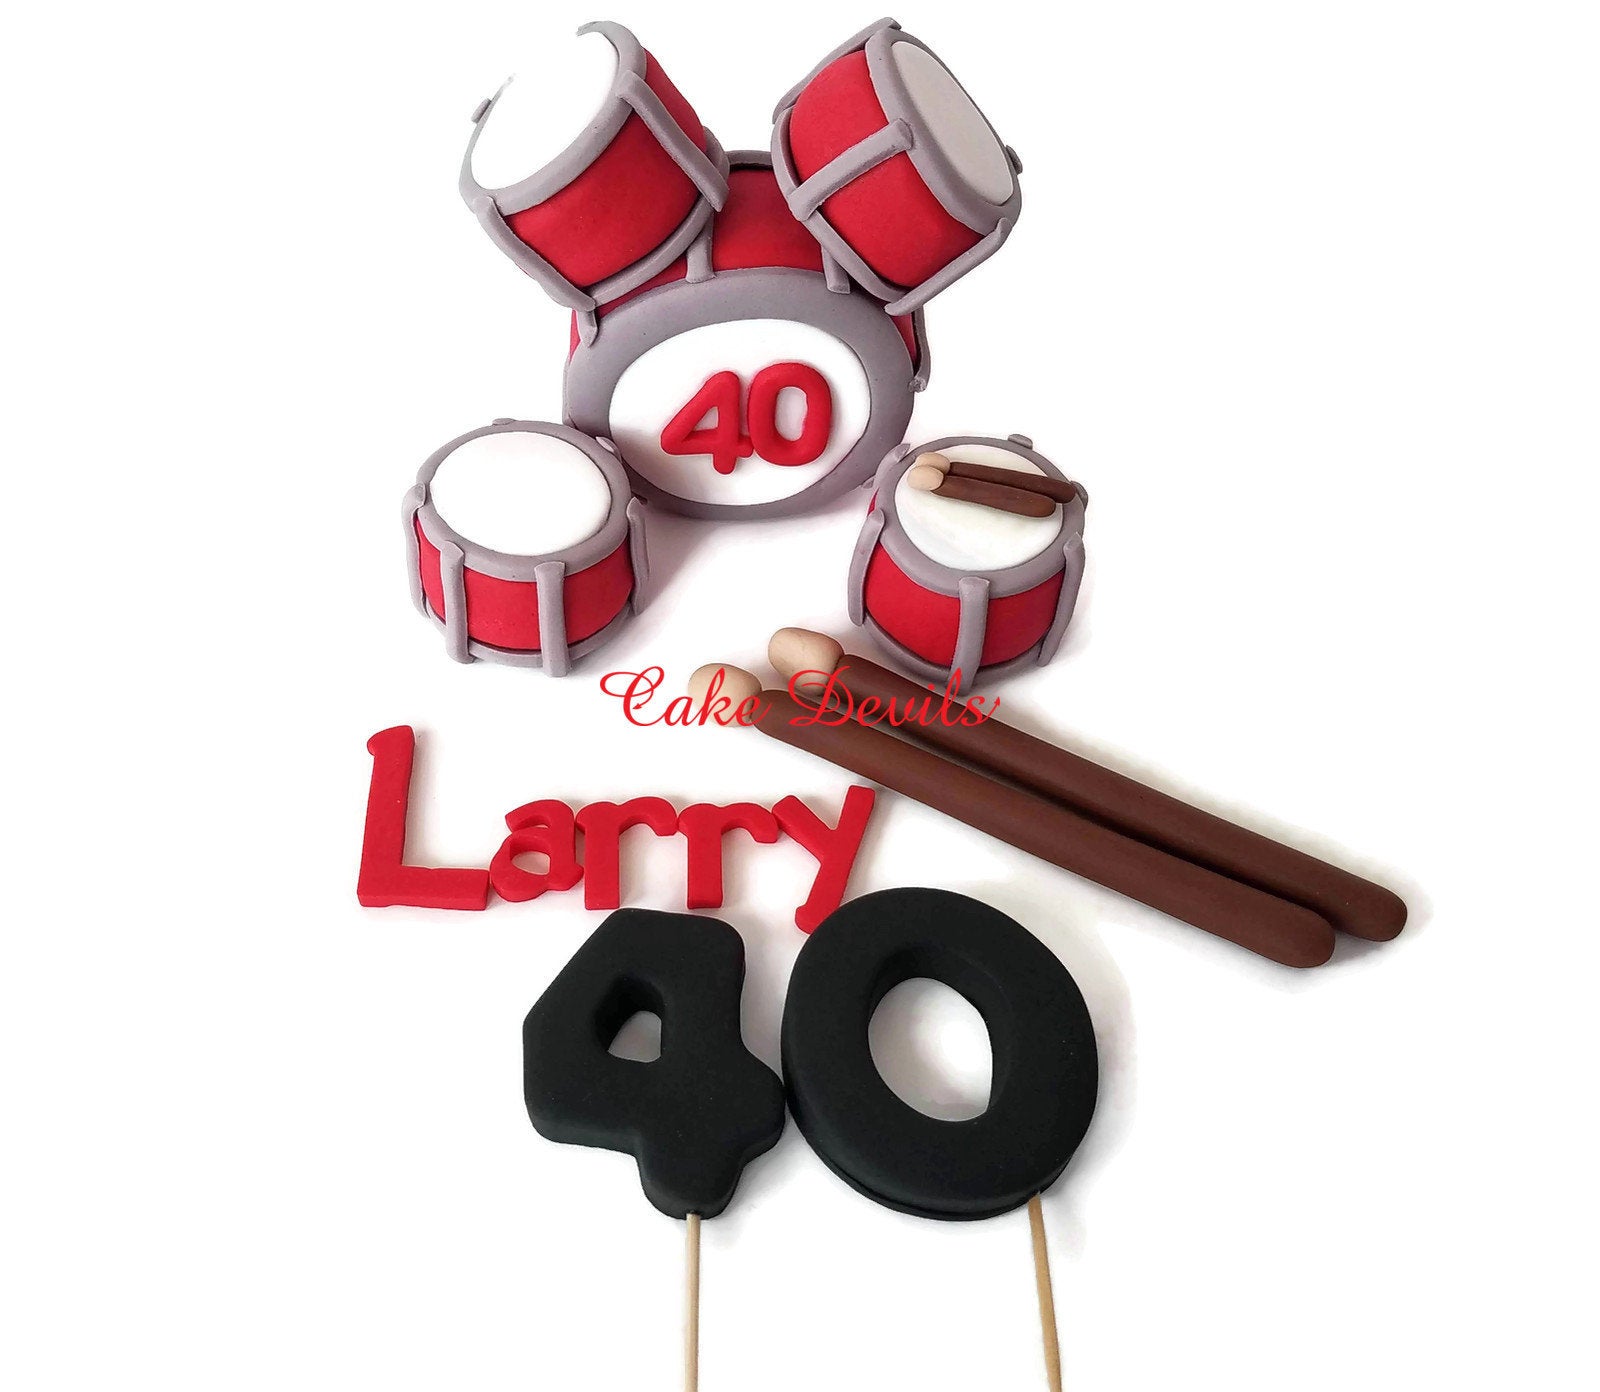 Drummer Musician Drums Birthday Cake Topper Personalized